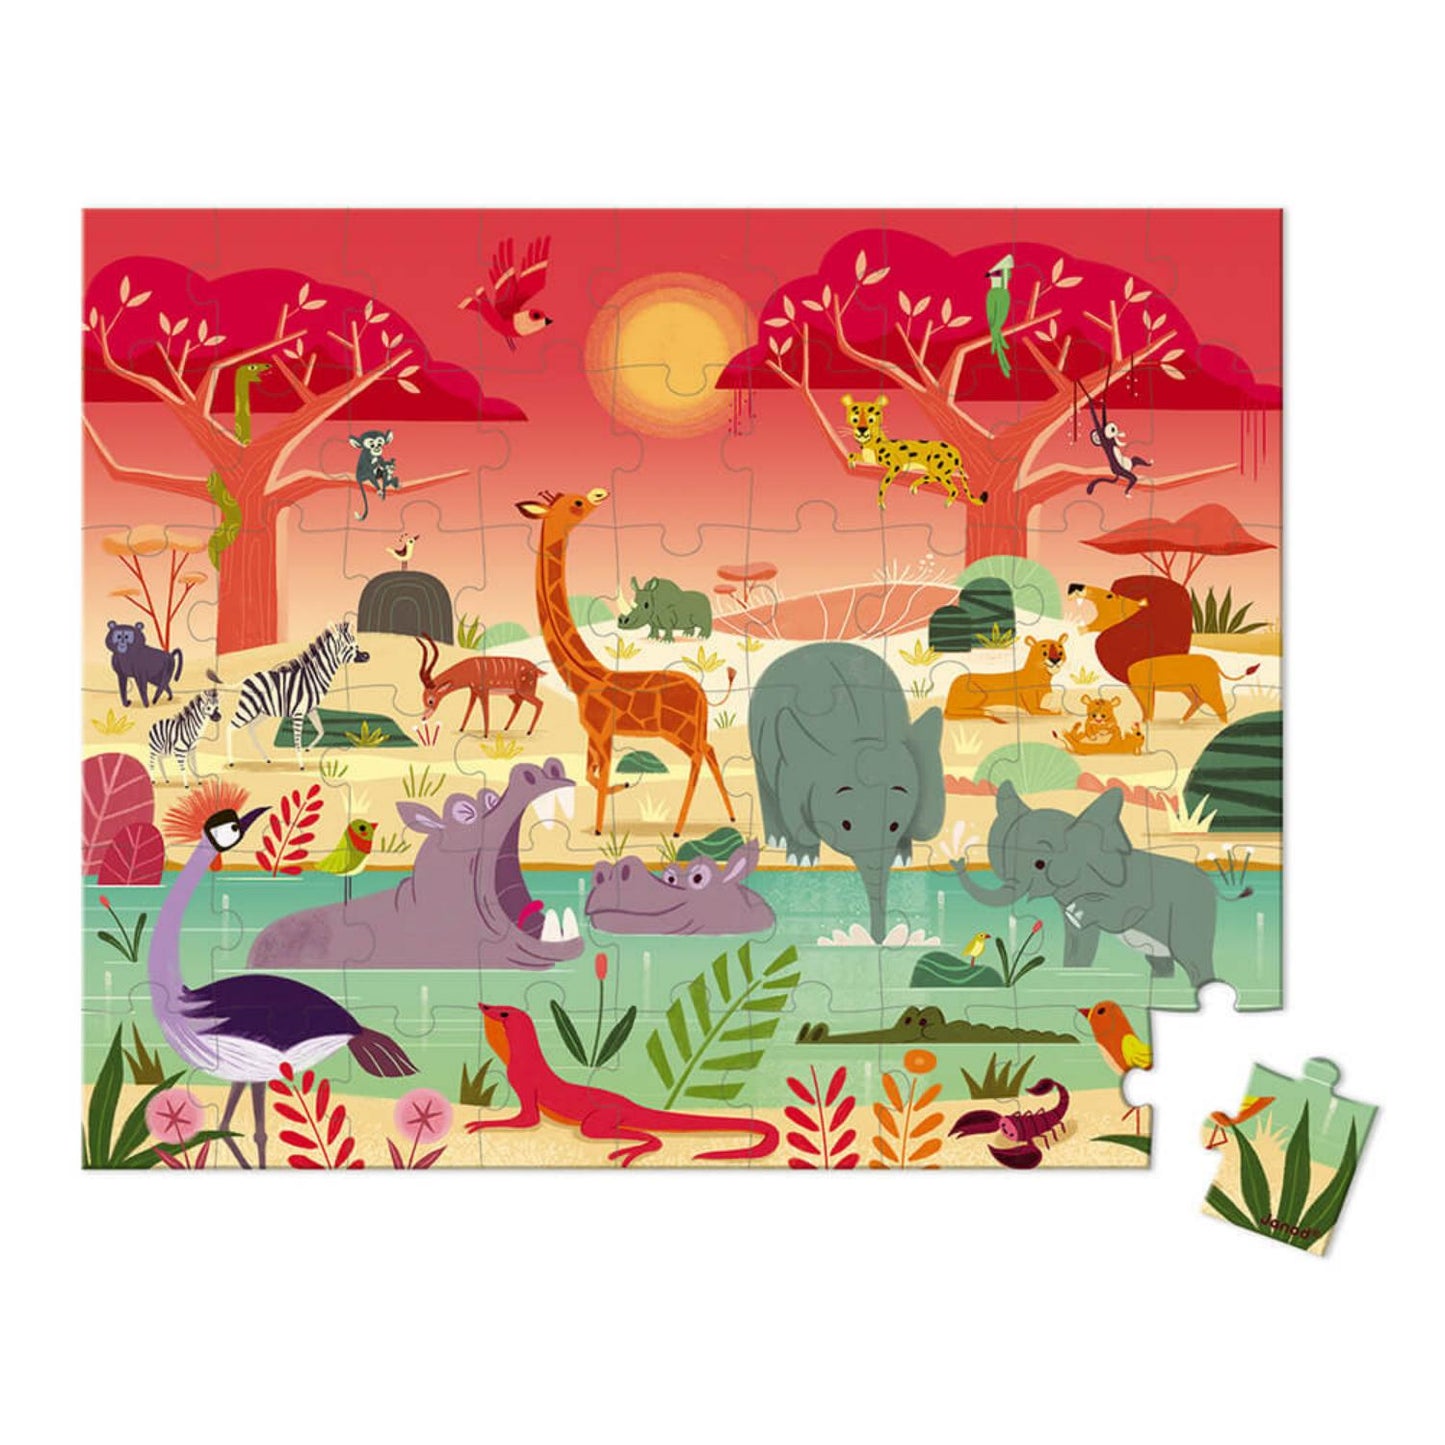 Animal Reserve Puzzle | Jigsaw Puzzle For Kids